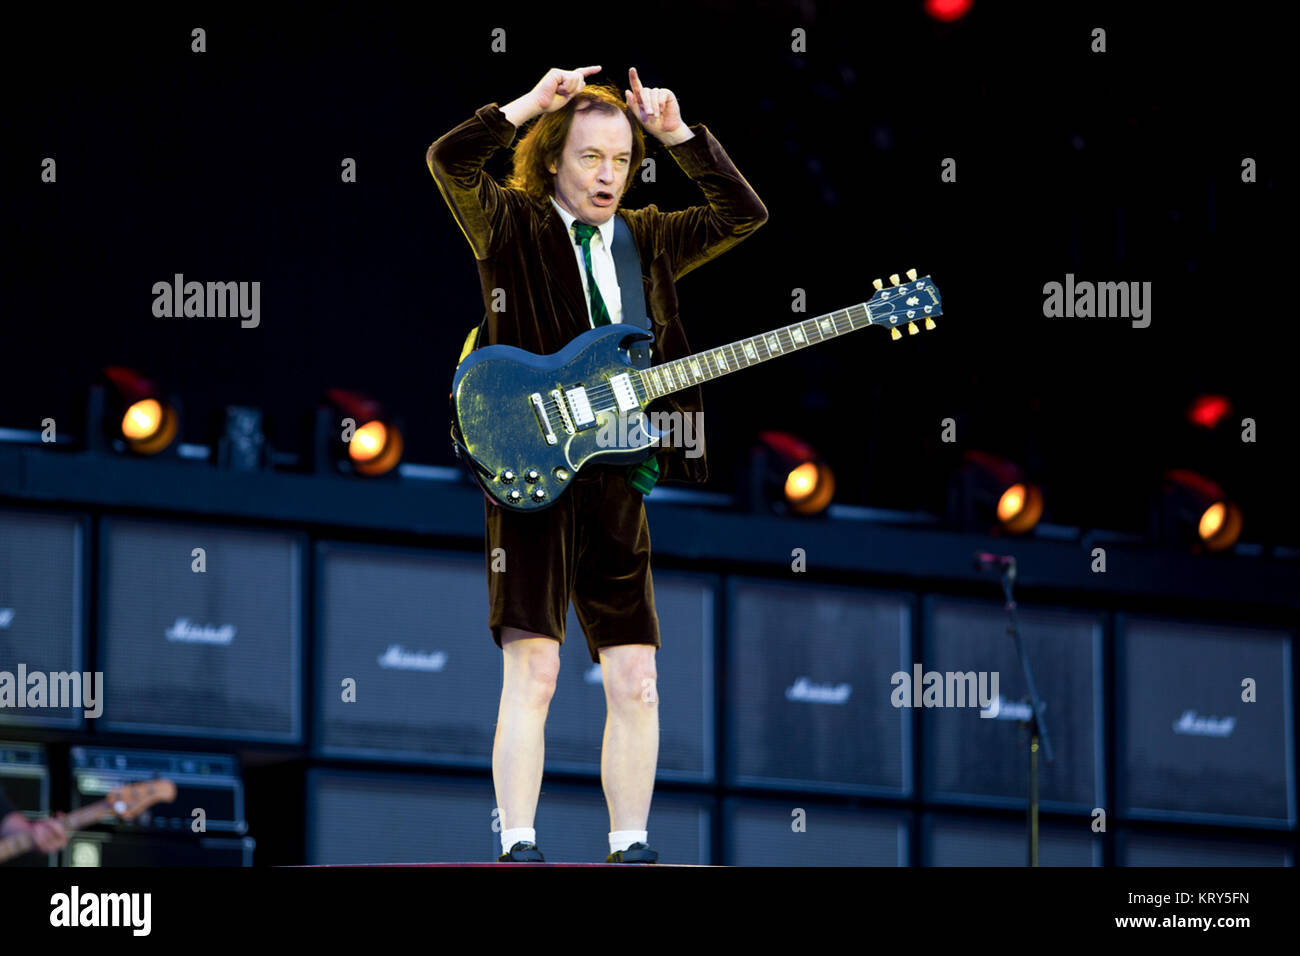 The Australian rock band AC/DC performs a live concert at Valle Hovin Stadion in Oslo as part of the Rock or Bust World 2015 Tour. Here guitarist Angus Young seen live on stage. Norway, 17/07 2015. Stock Photo